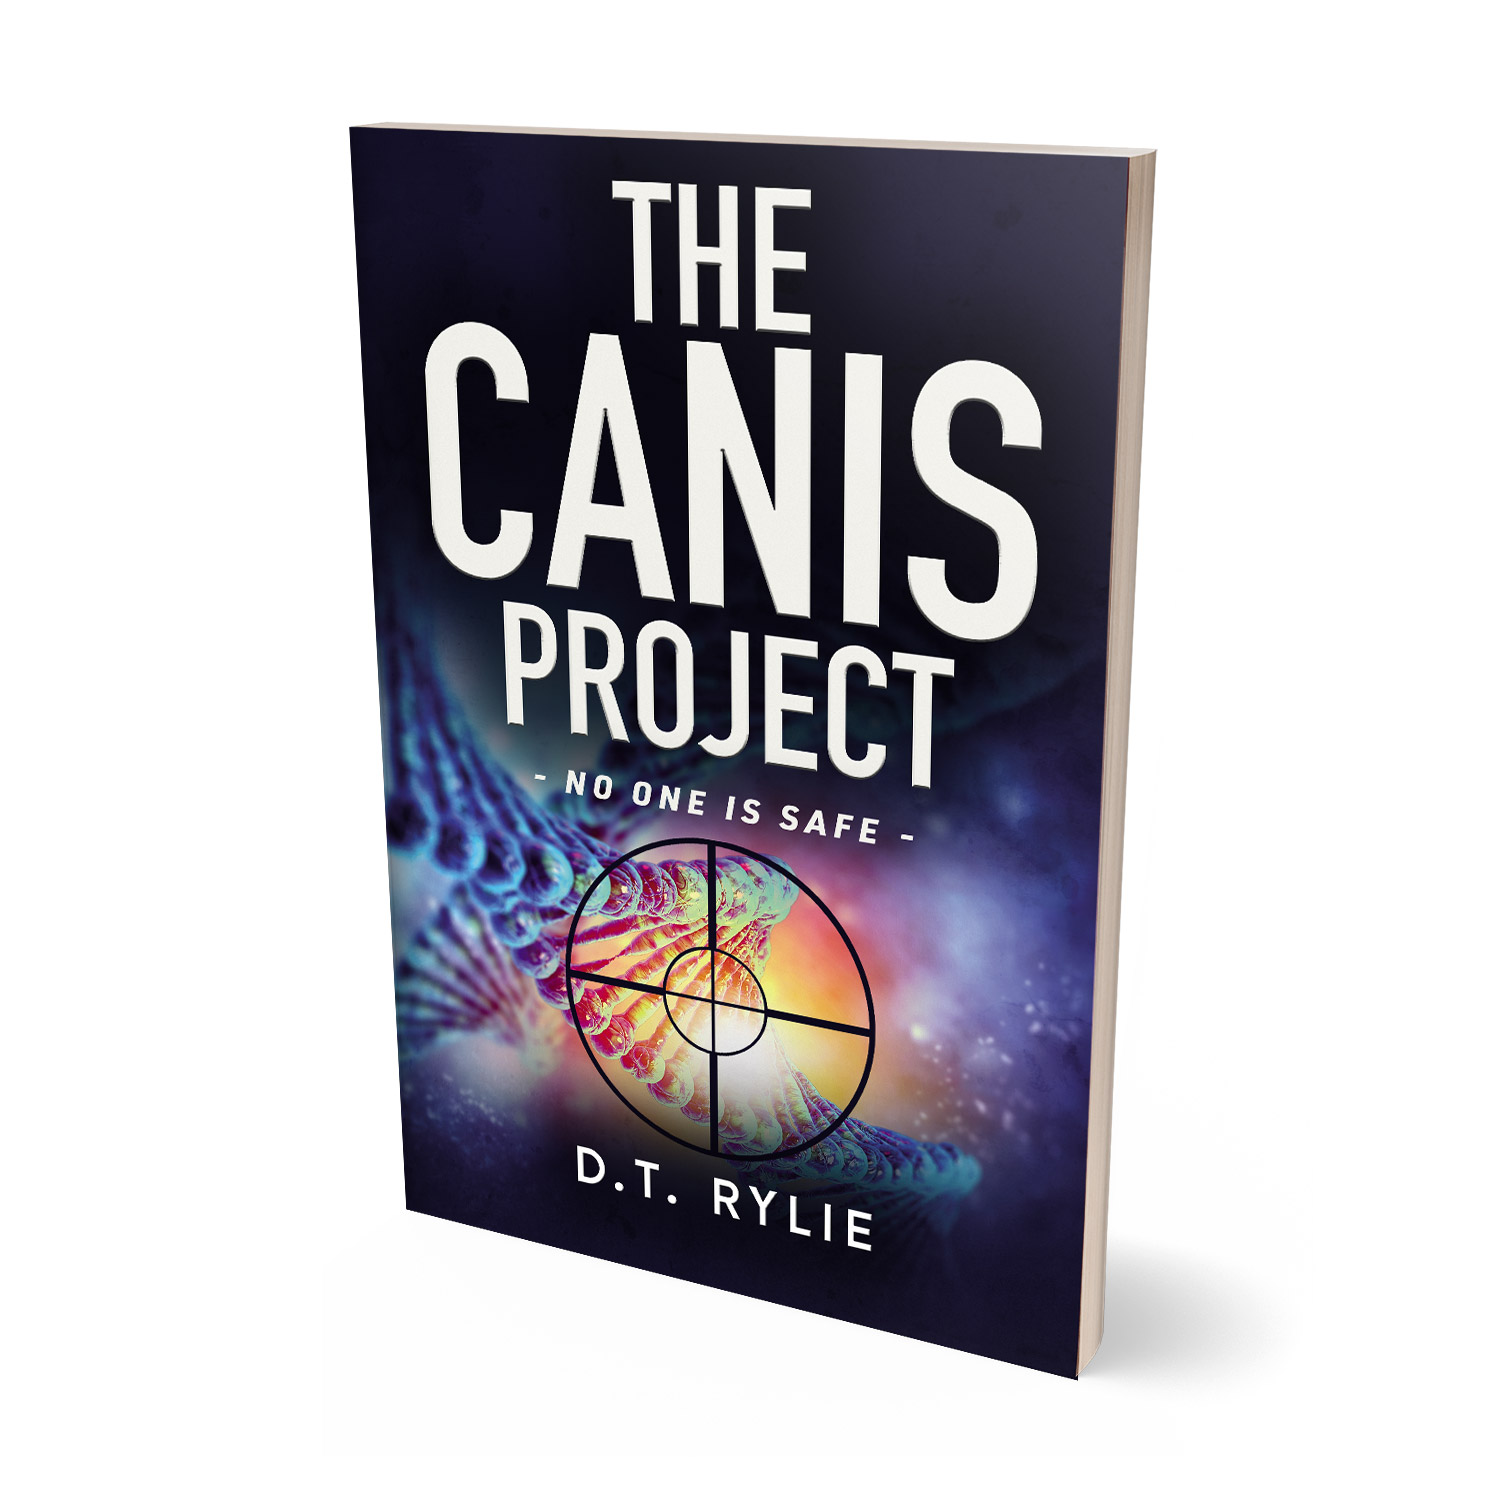 'The Canis Project' is a dark, genetics thriller by D.T. Rylie. The book cover design and interior formatting are by Mark Thomas. To learn more about what Mark could do for your book, please visit coverness.com.